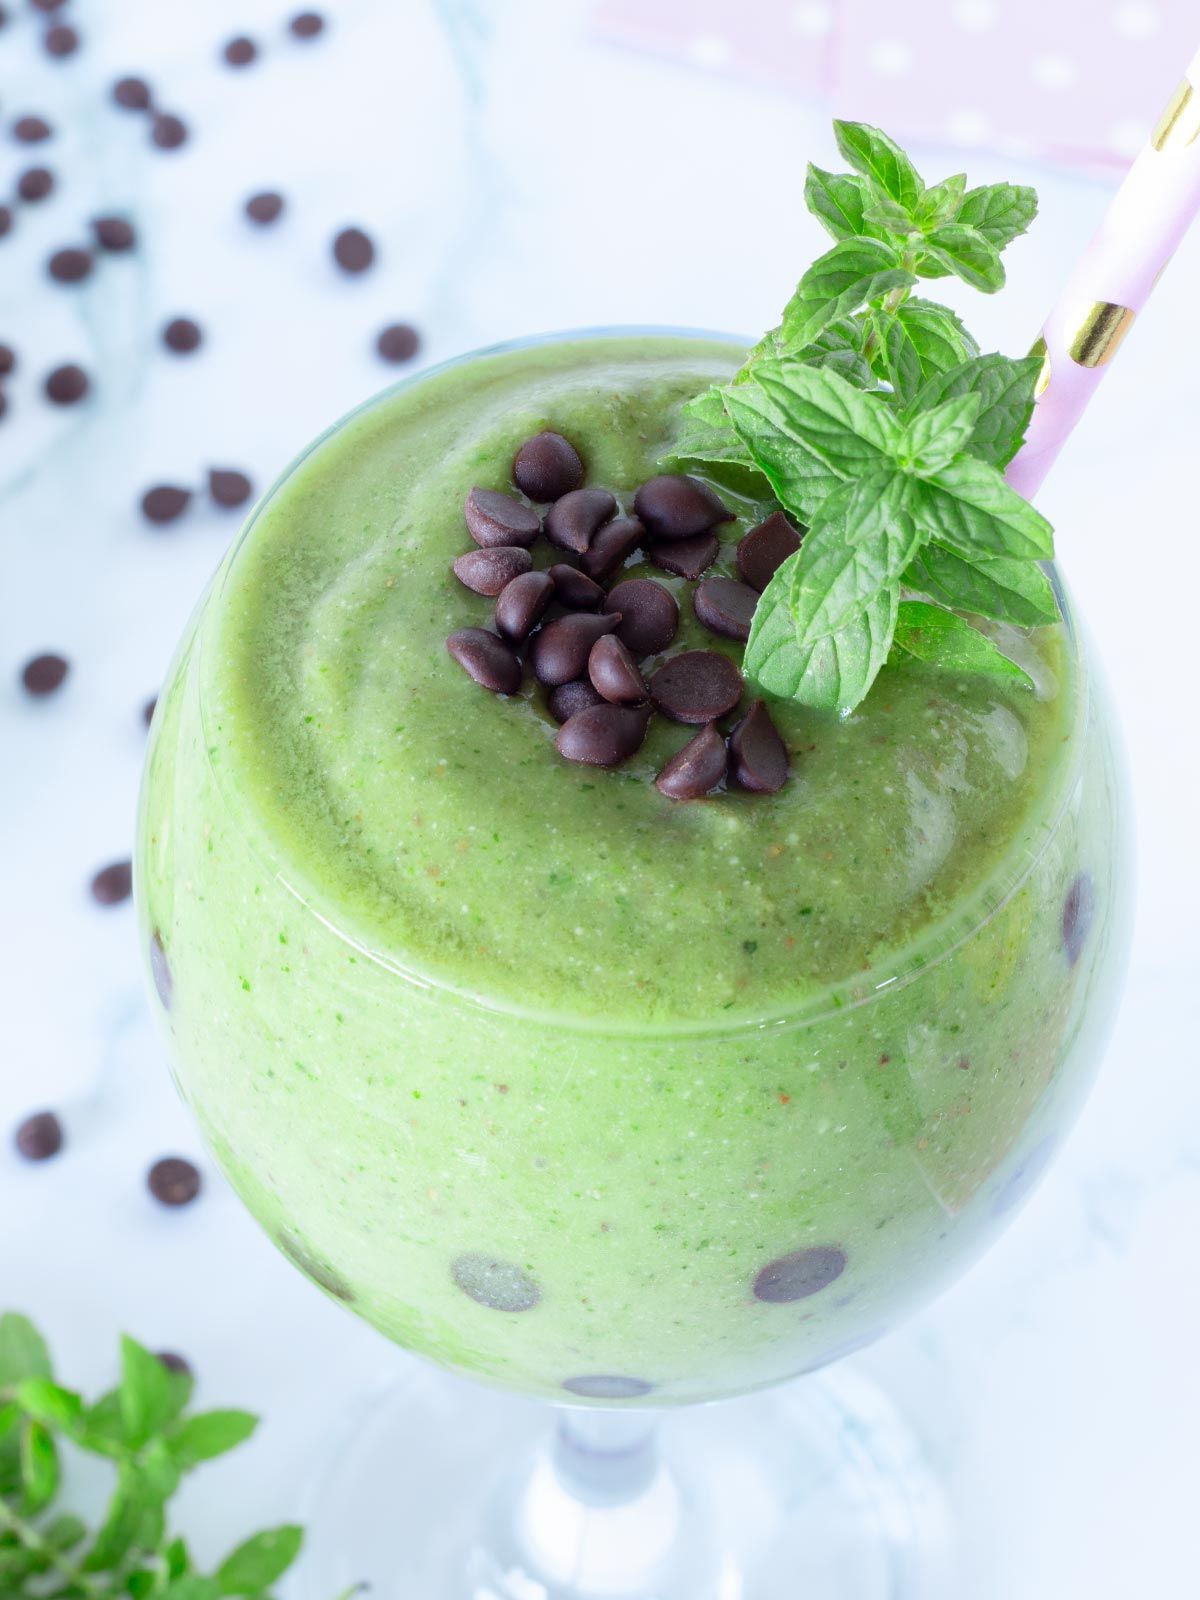 Green mint smoothie with chocolate chips and banana.